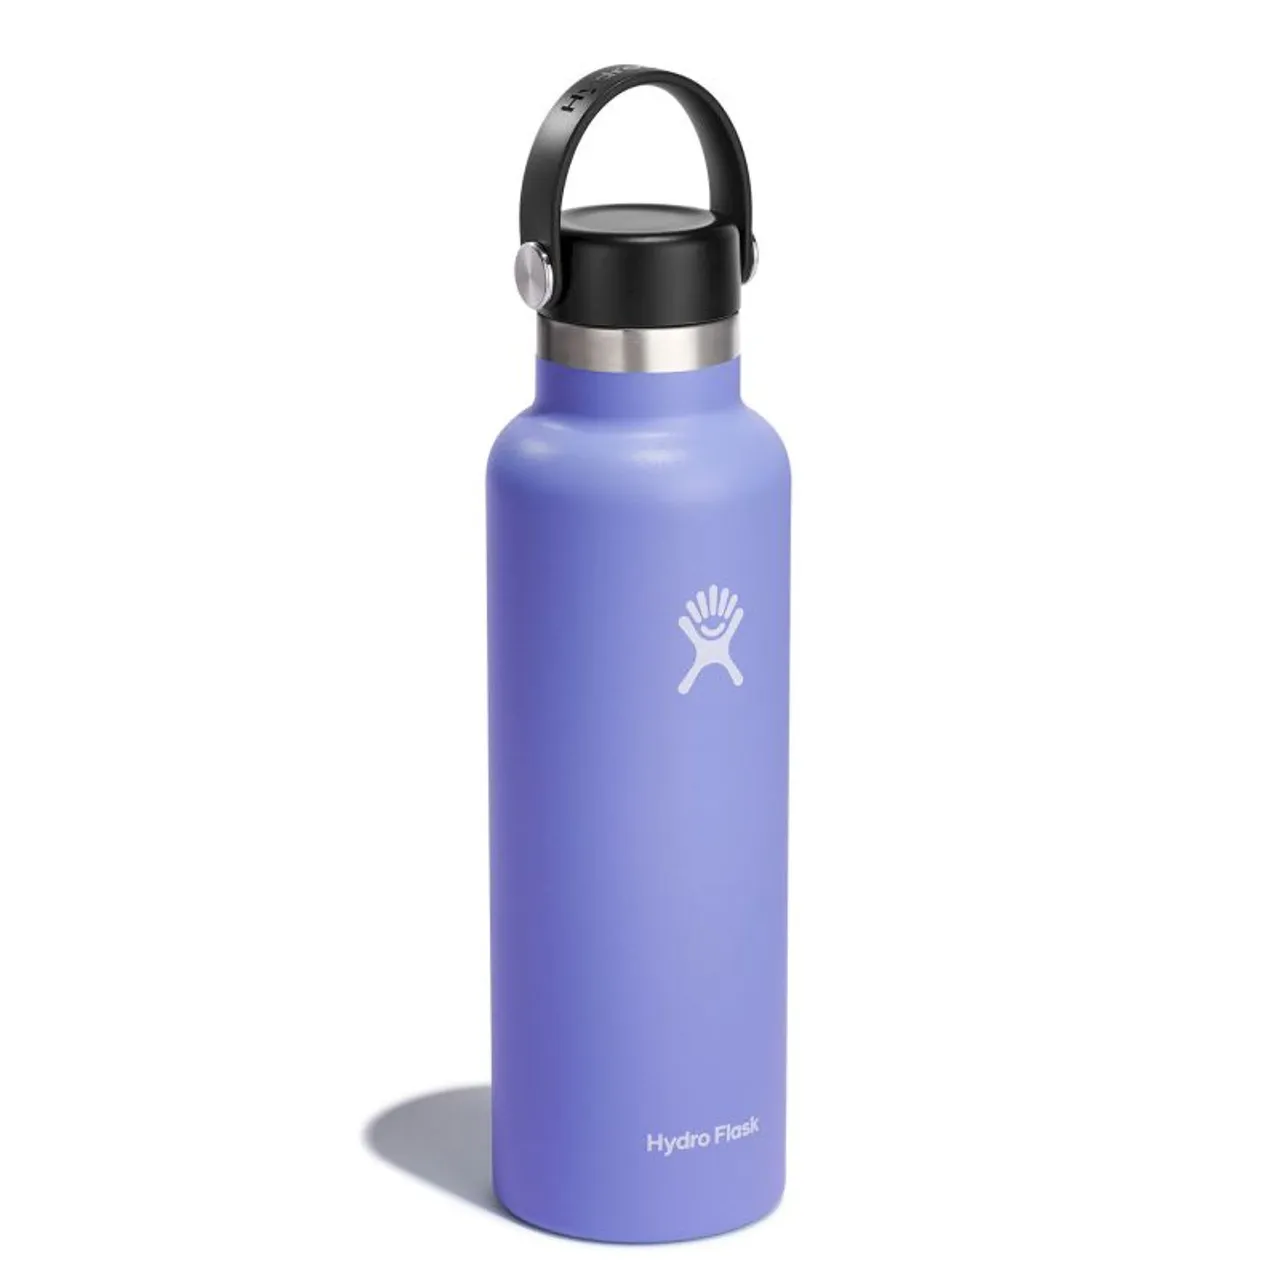 Hydro Flask 21 oz Standard Mouth - Isolierflasche 621 mL Lupine 21 oz (621 ml)